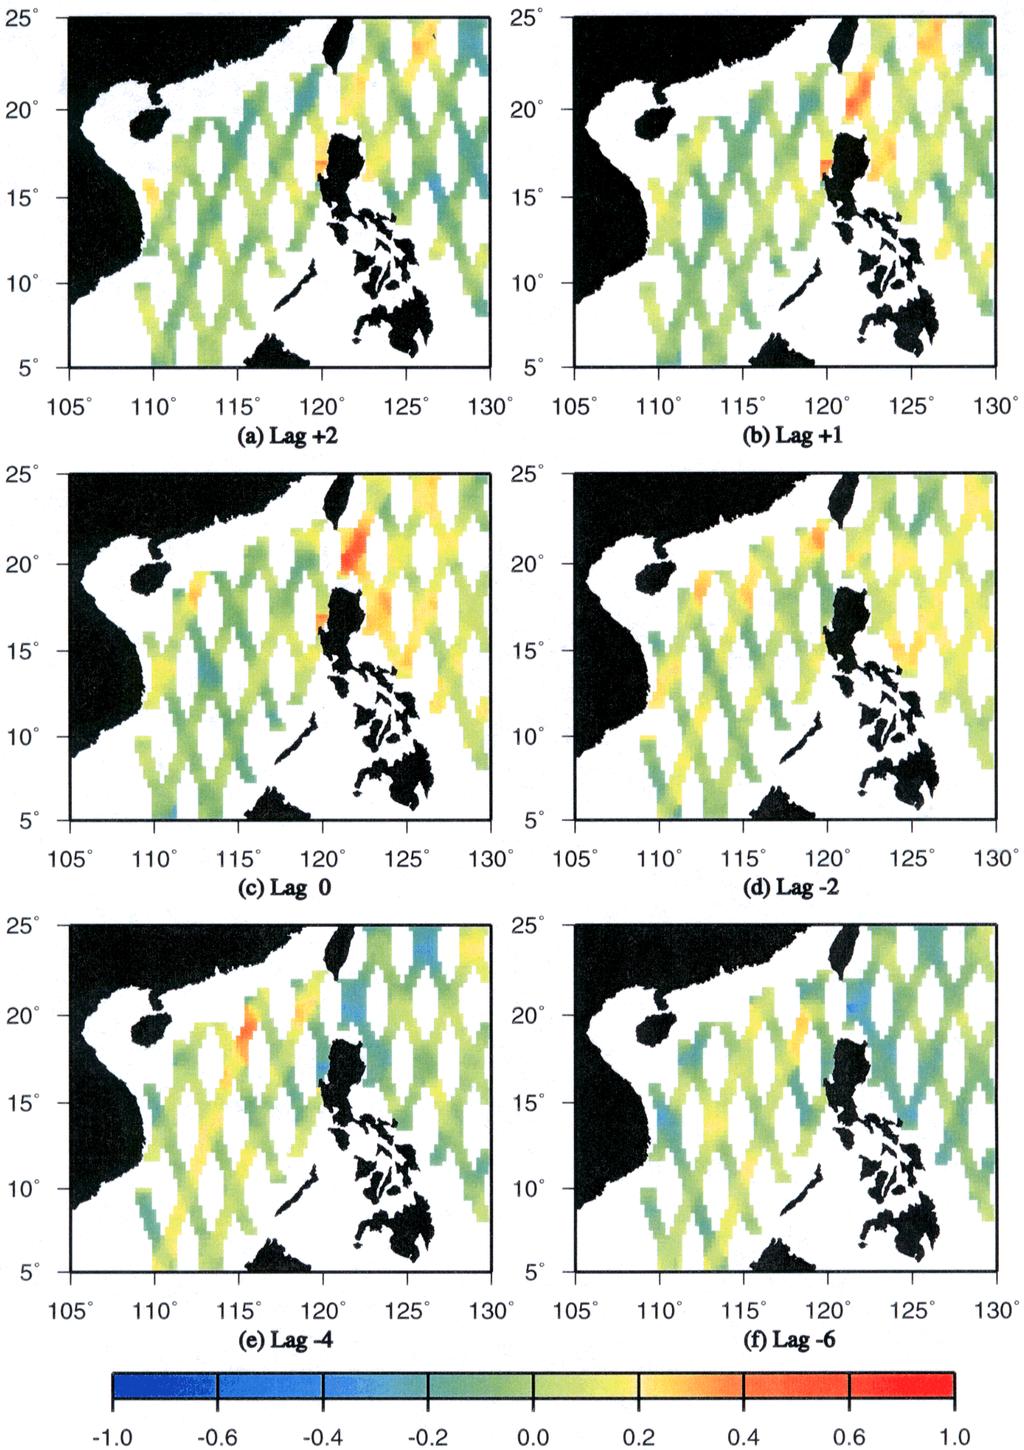 Fig. 5. Spatial distribution of cross correlation coefficient between the reference area in the Luzon Strait and each T/P data point.